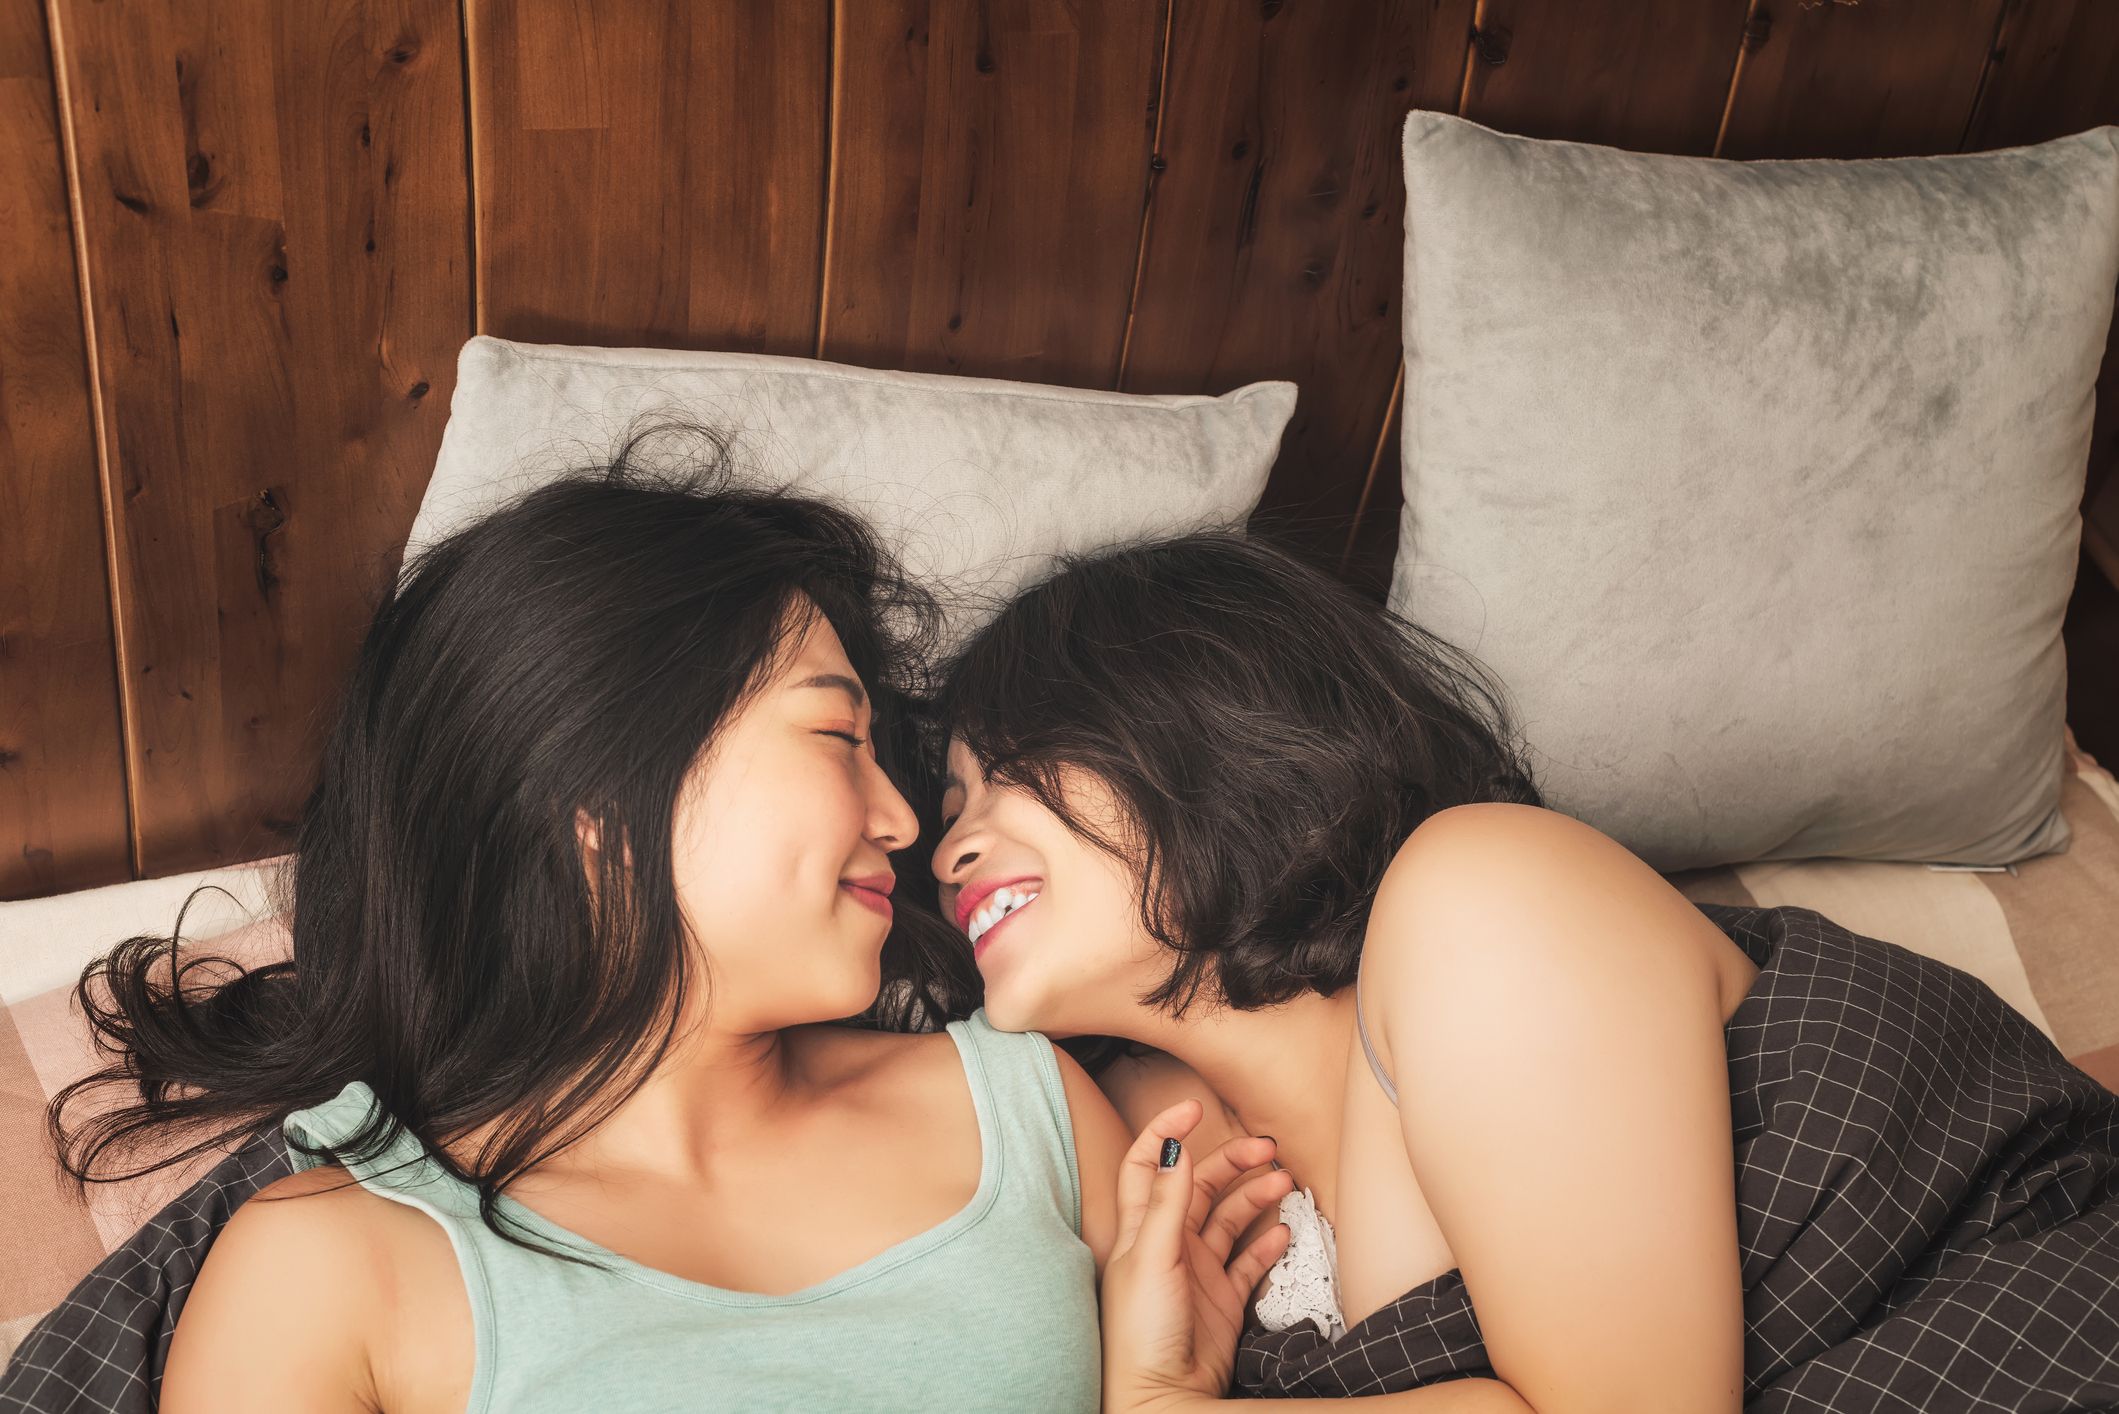 Why Straight Women May Prefer Lesbian Porn, Per Sex Therapists